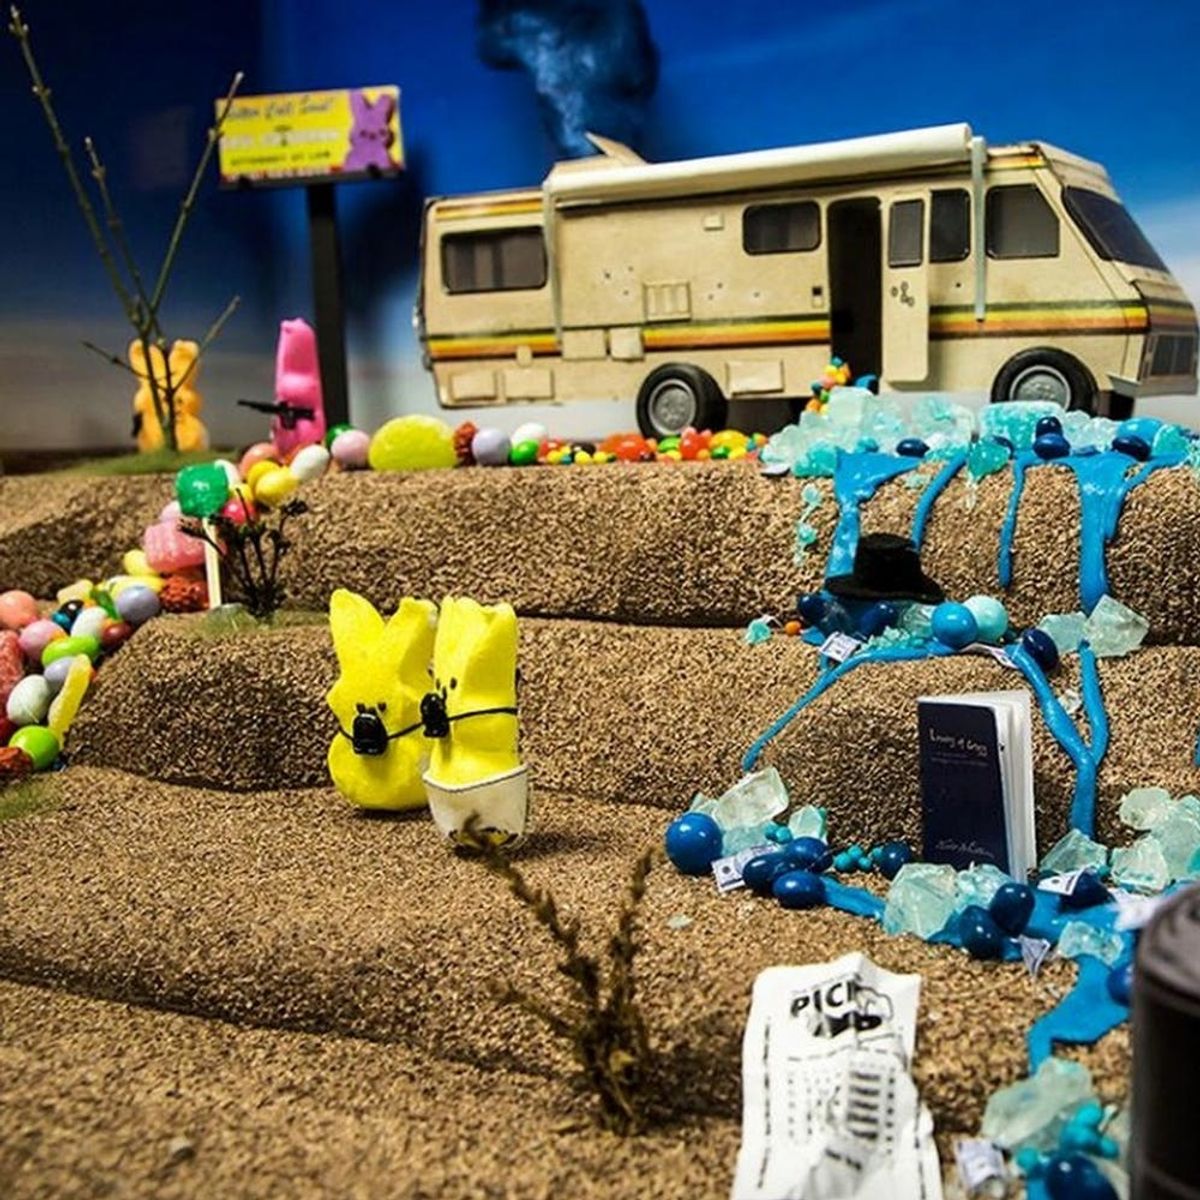 You’ve NEVER Seen Peeps like These Before